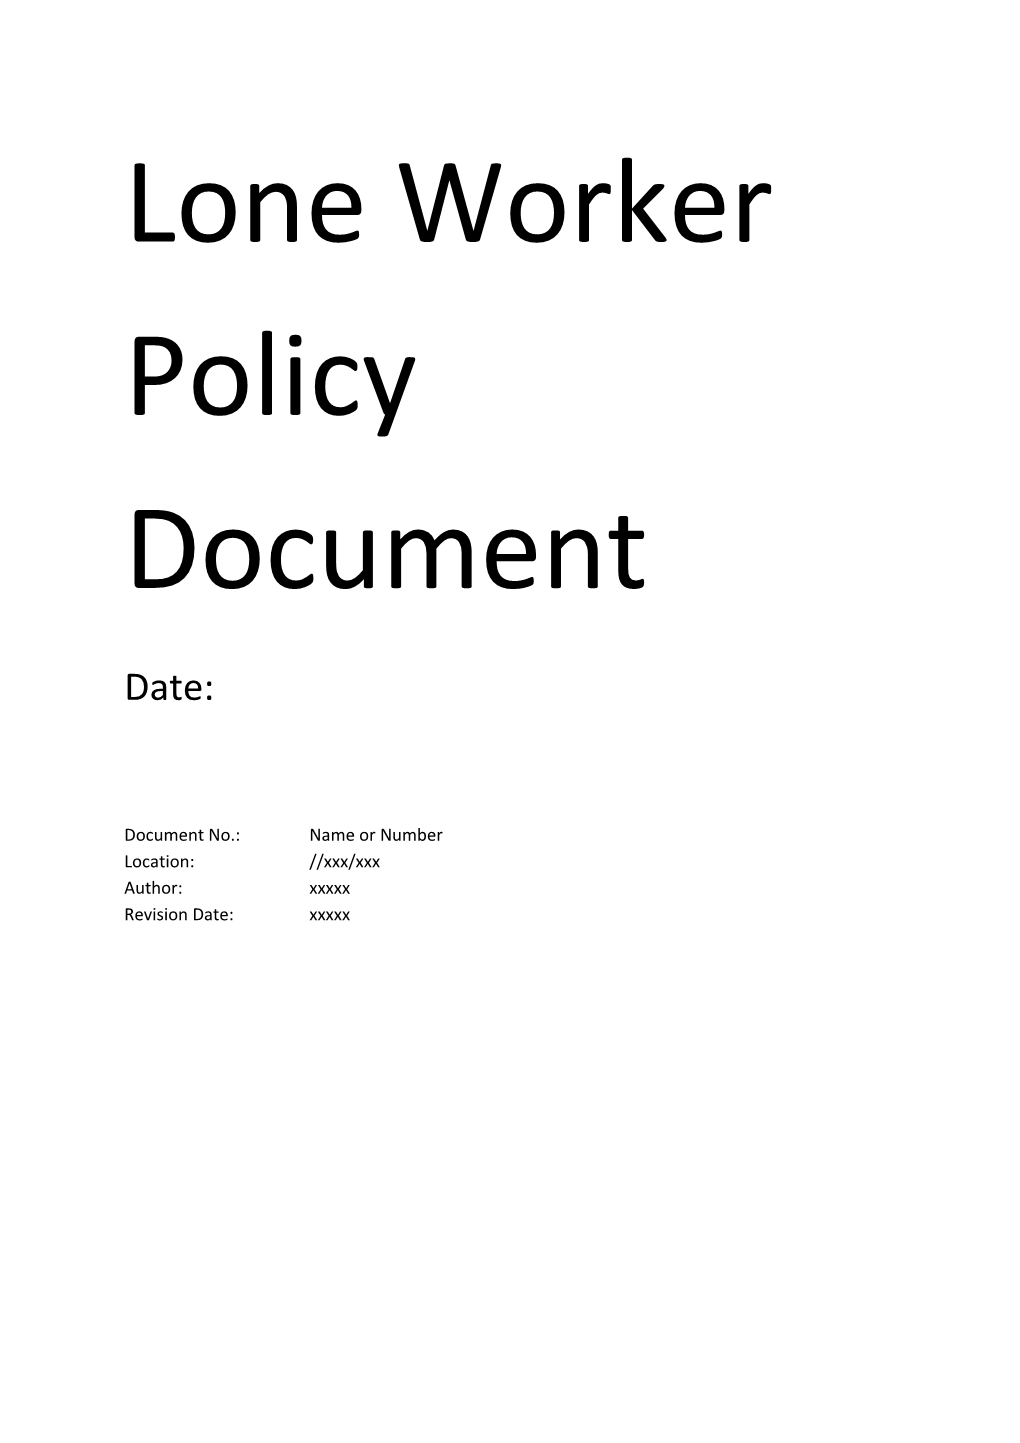 Lone Worker Policy Document